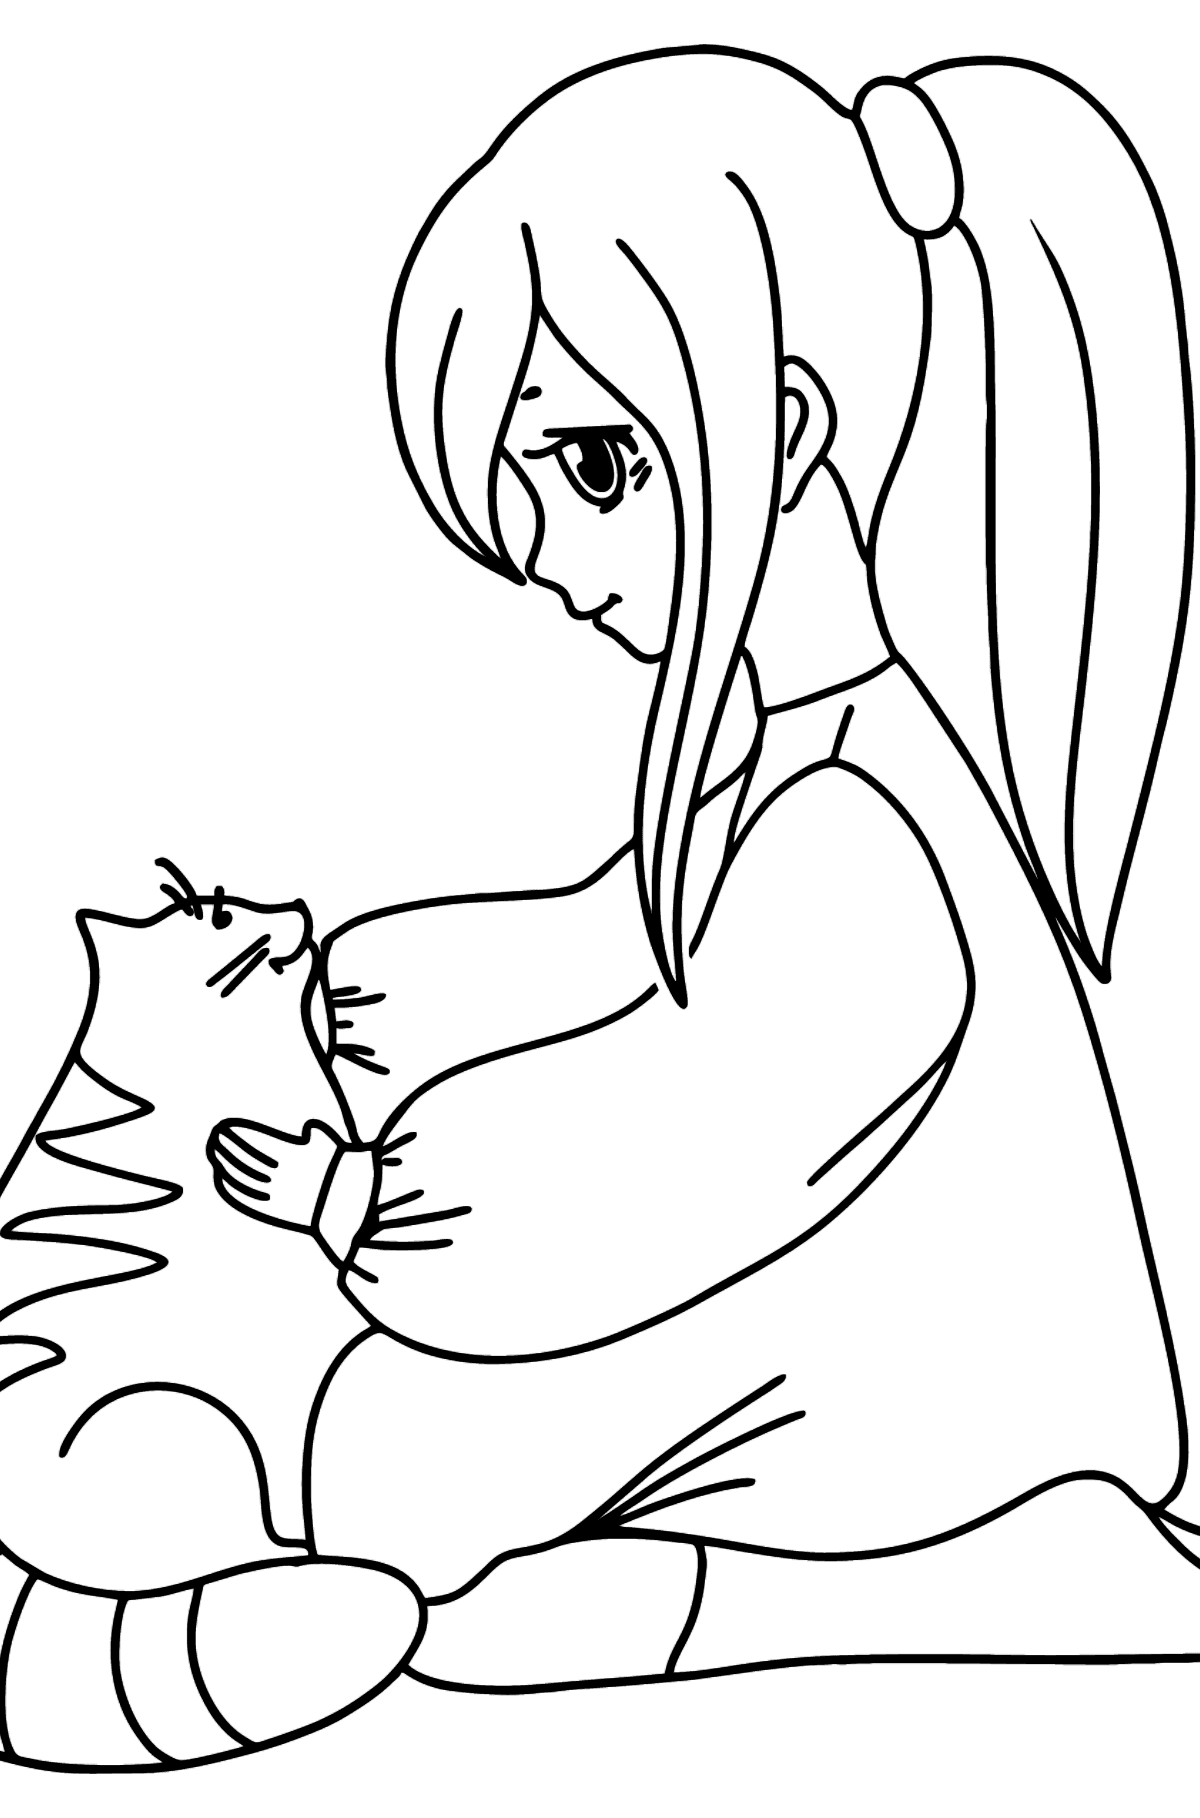 Anime Girl with Cat coloring page - Coloring Pages for Kids